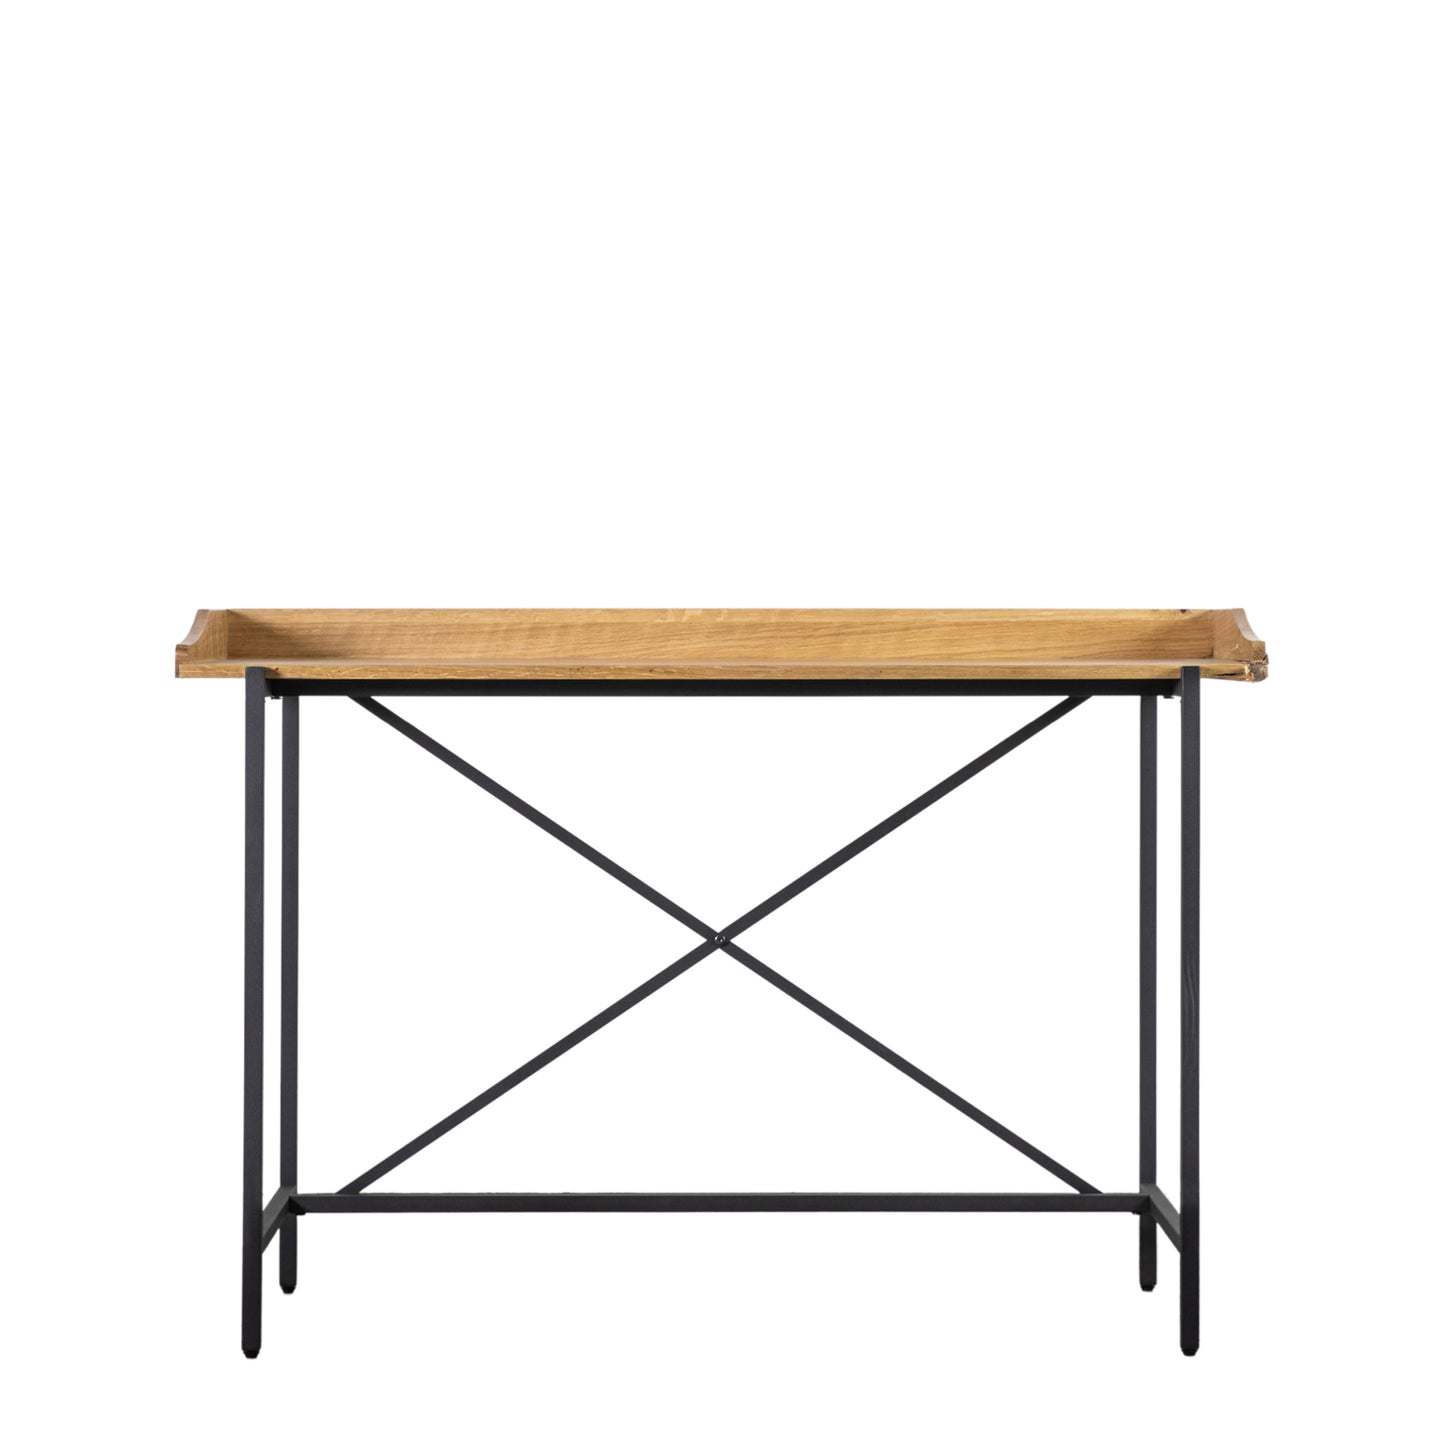 A black and wood Torrington Desk with a wooden top from Kikiathome.co.uk, perfect for home furniture and interior decor.